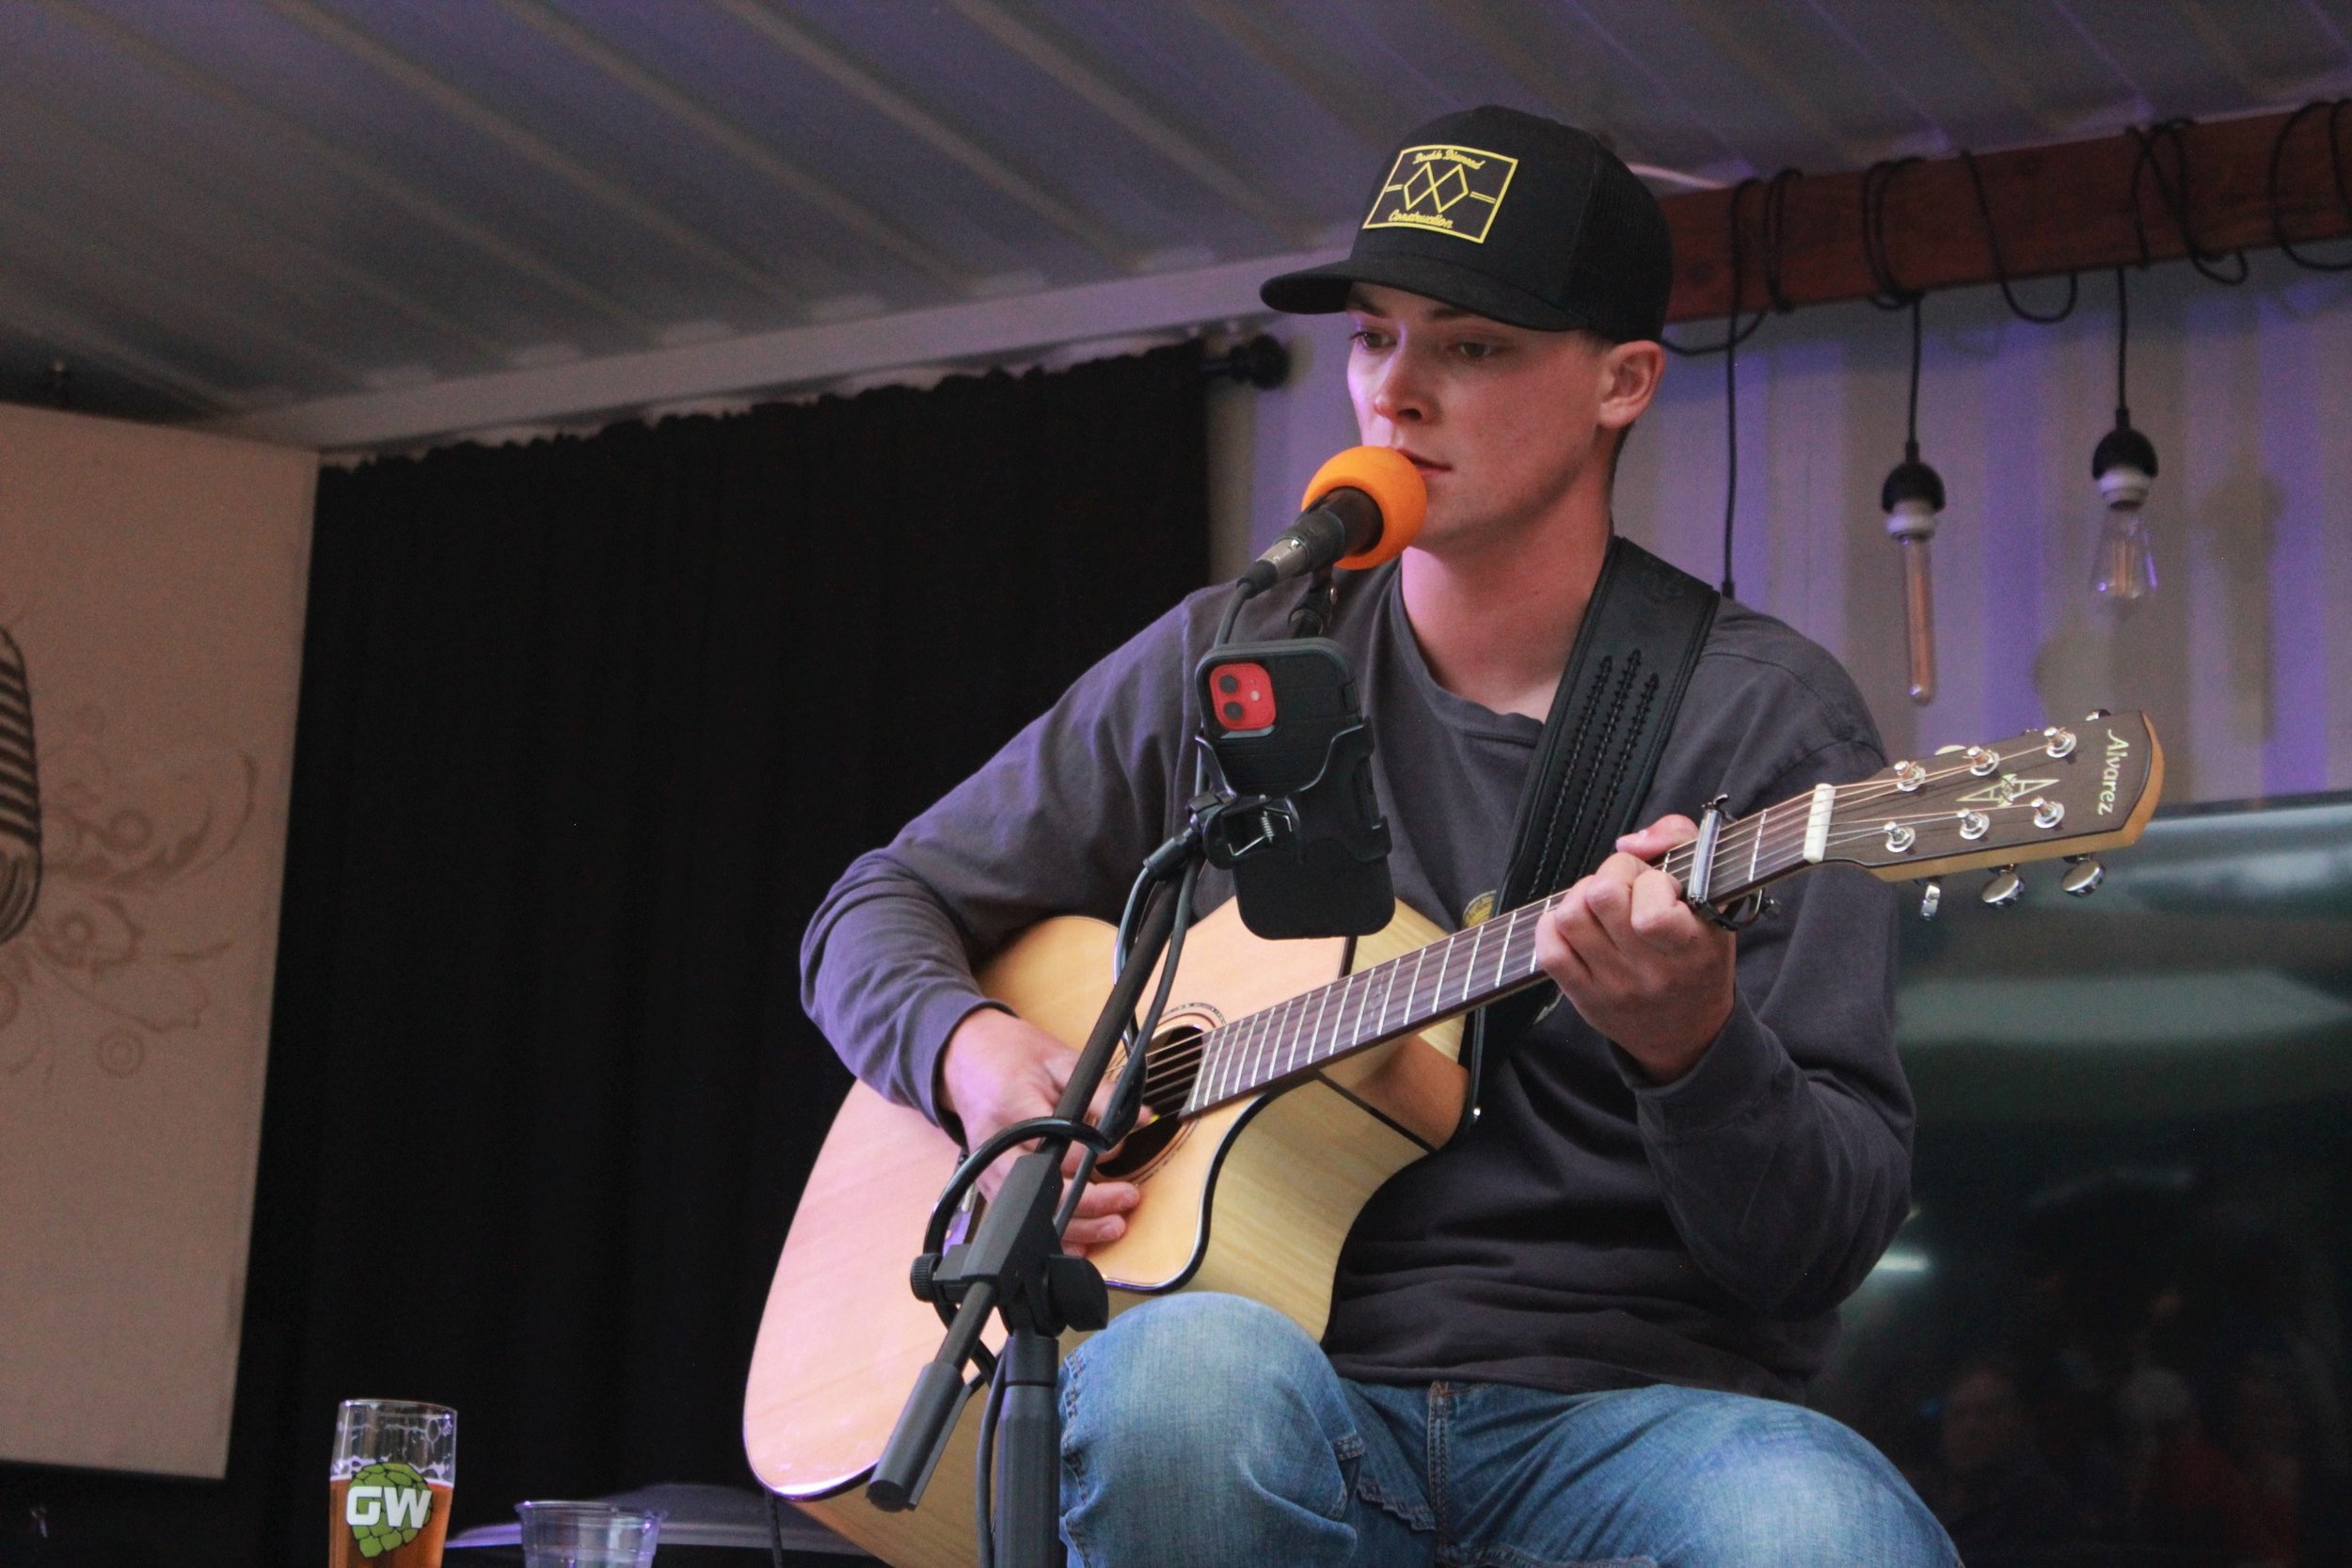 Singer Ben Wagner performs at Groundwork Brewery.